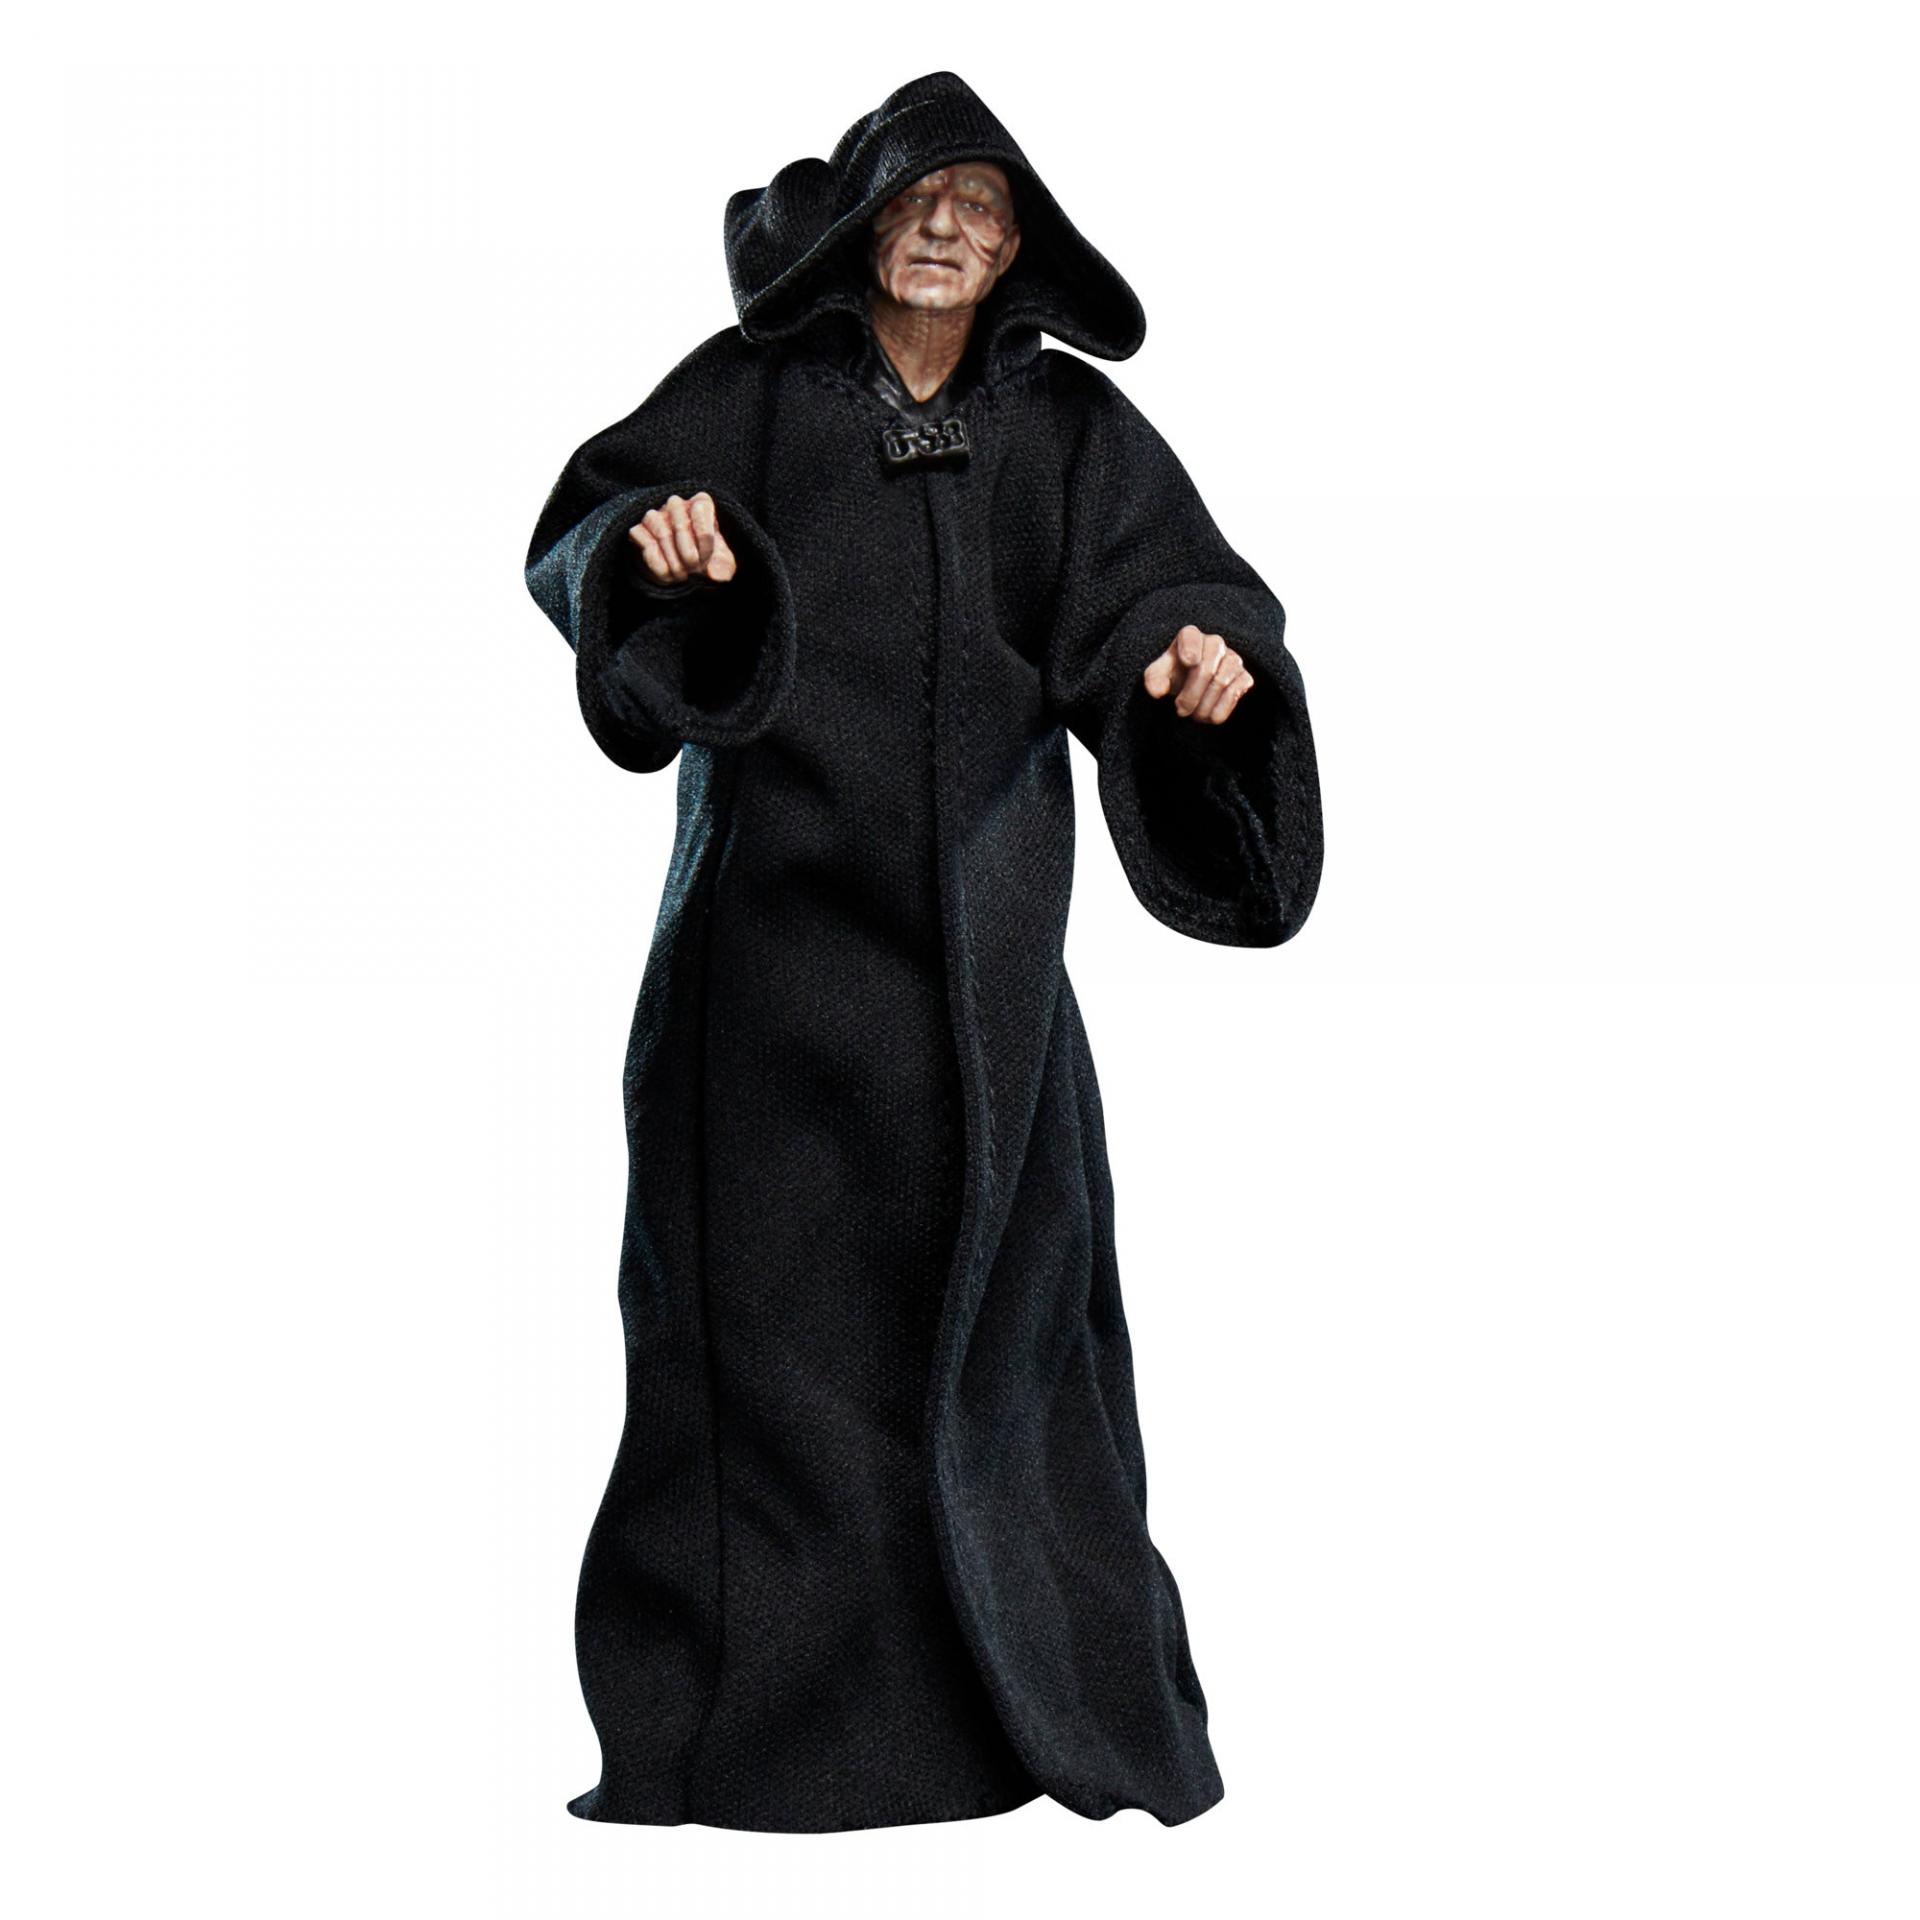 Star wars the black series archive emperor palpatine 15cm jawascave 5